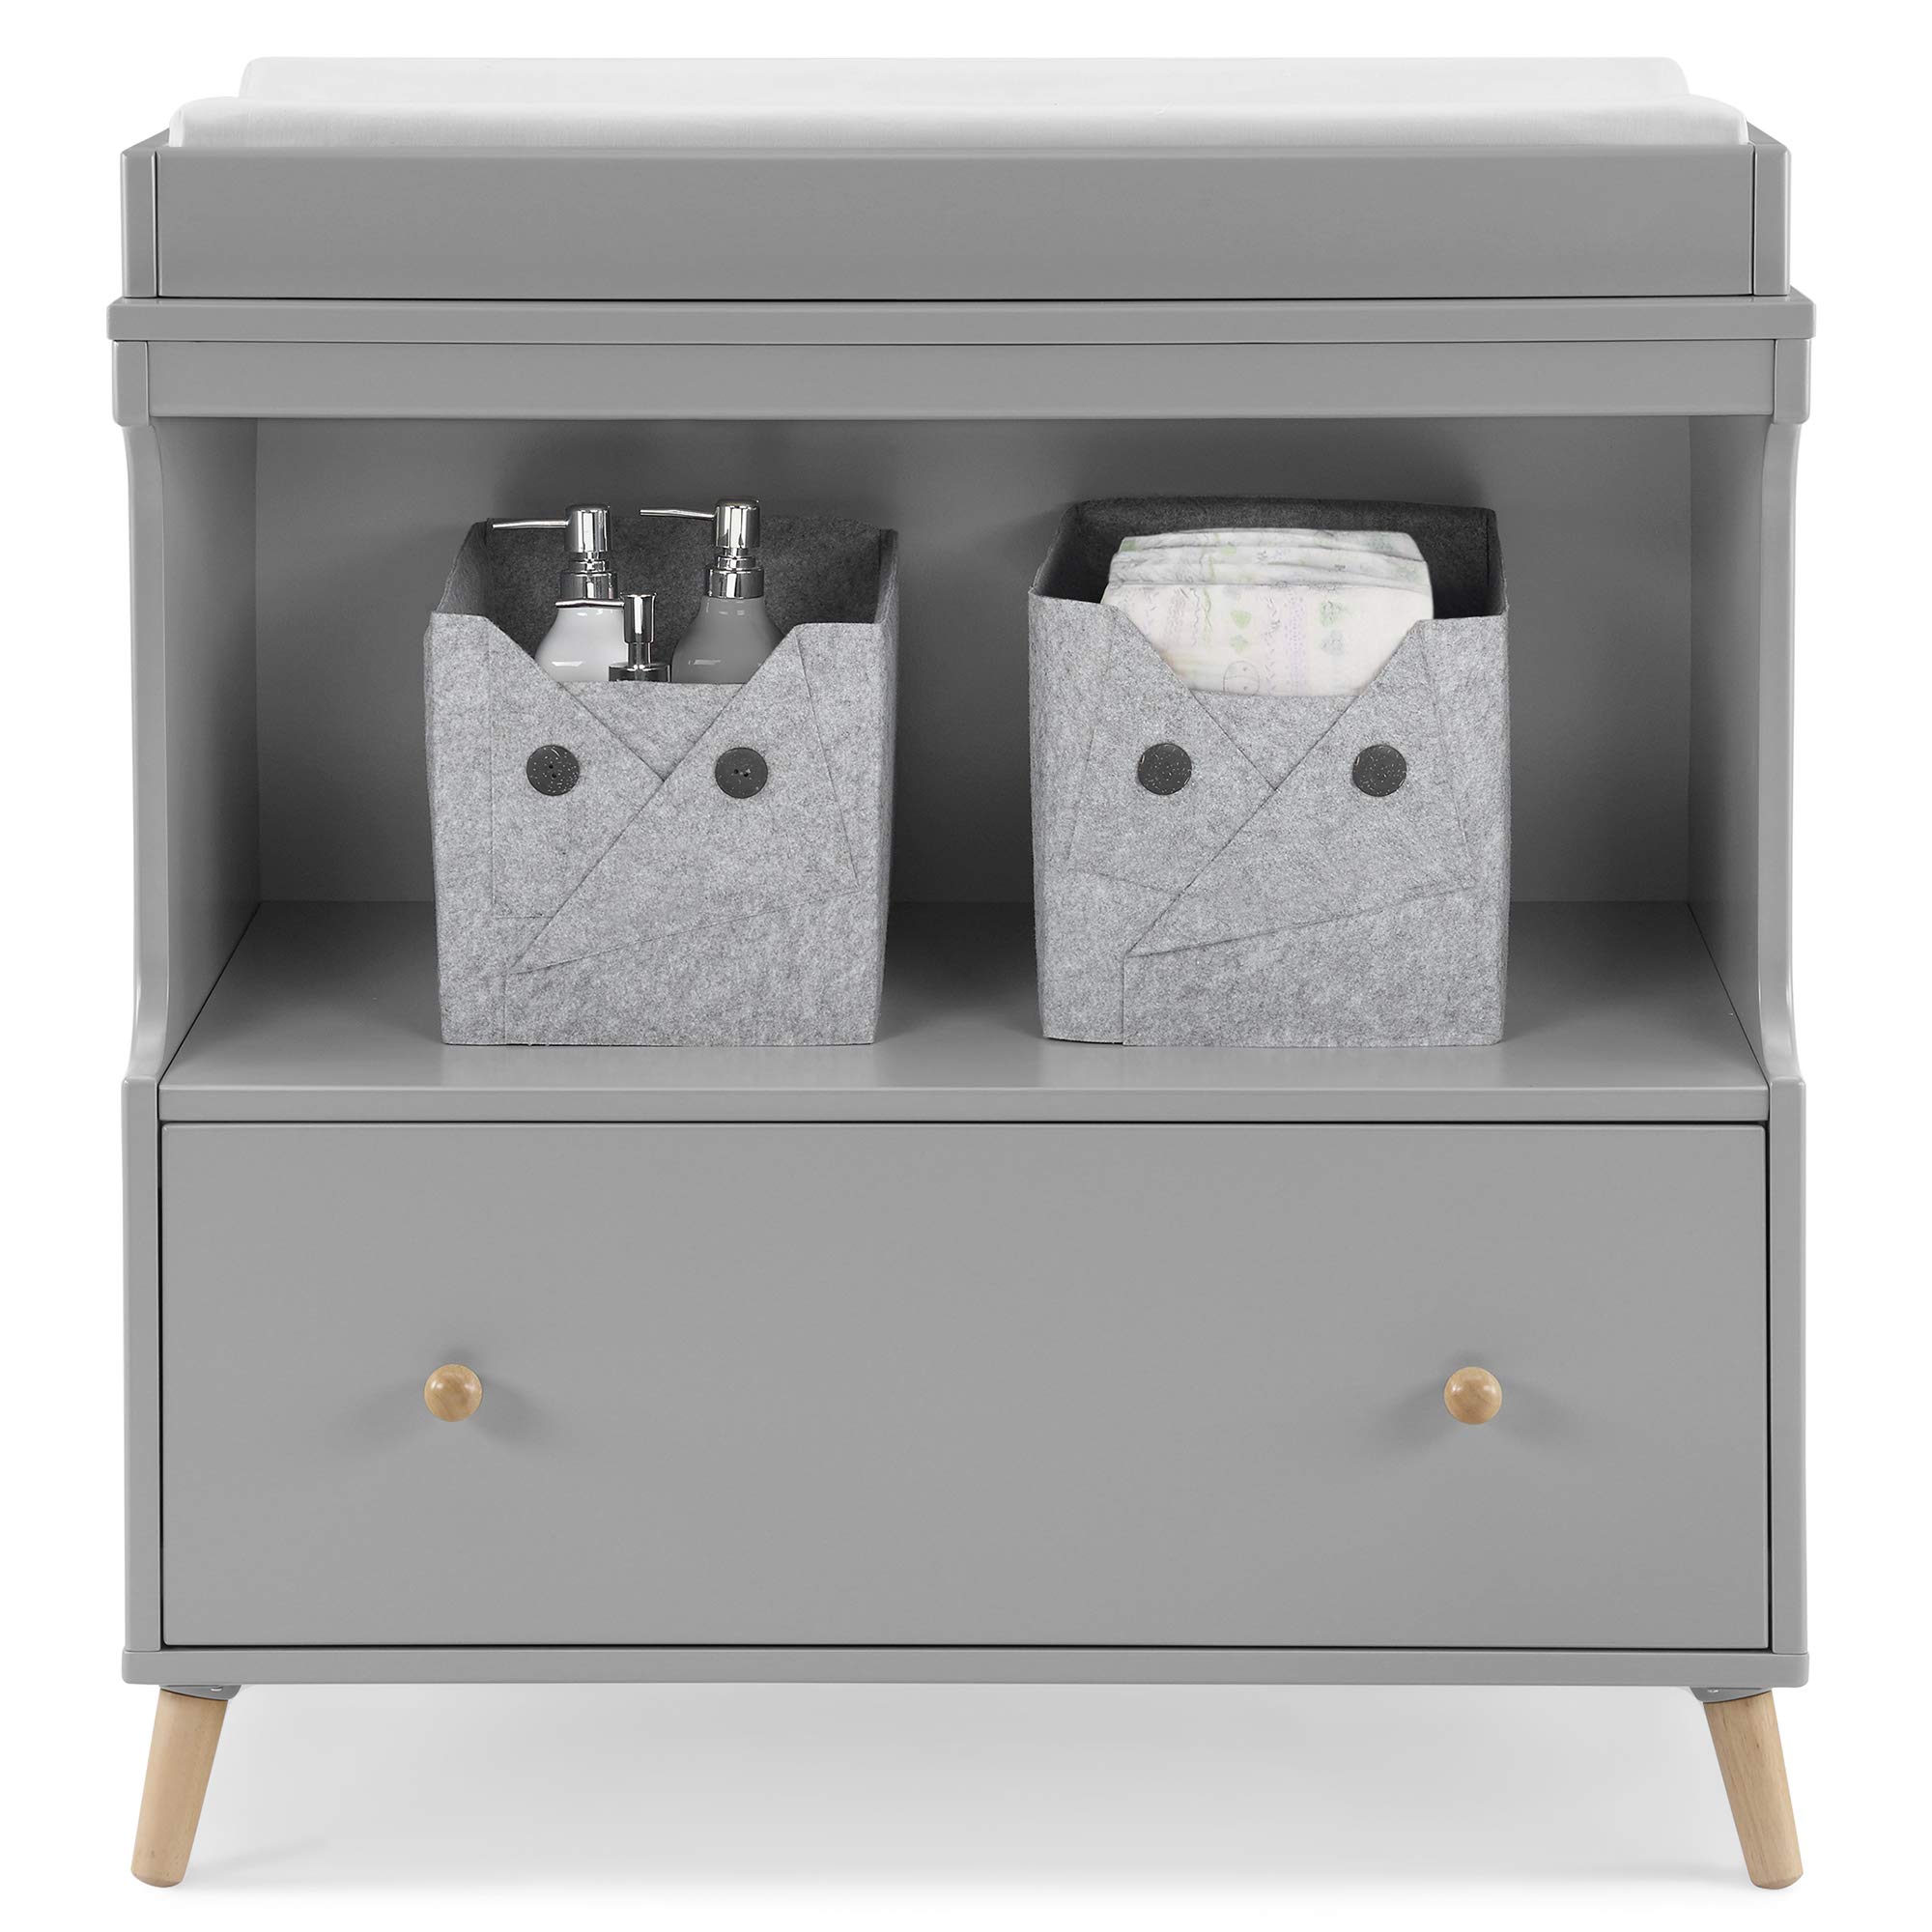 Delta Children Essex Convertible Changing Table with Drawer, Grey/Natural